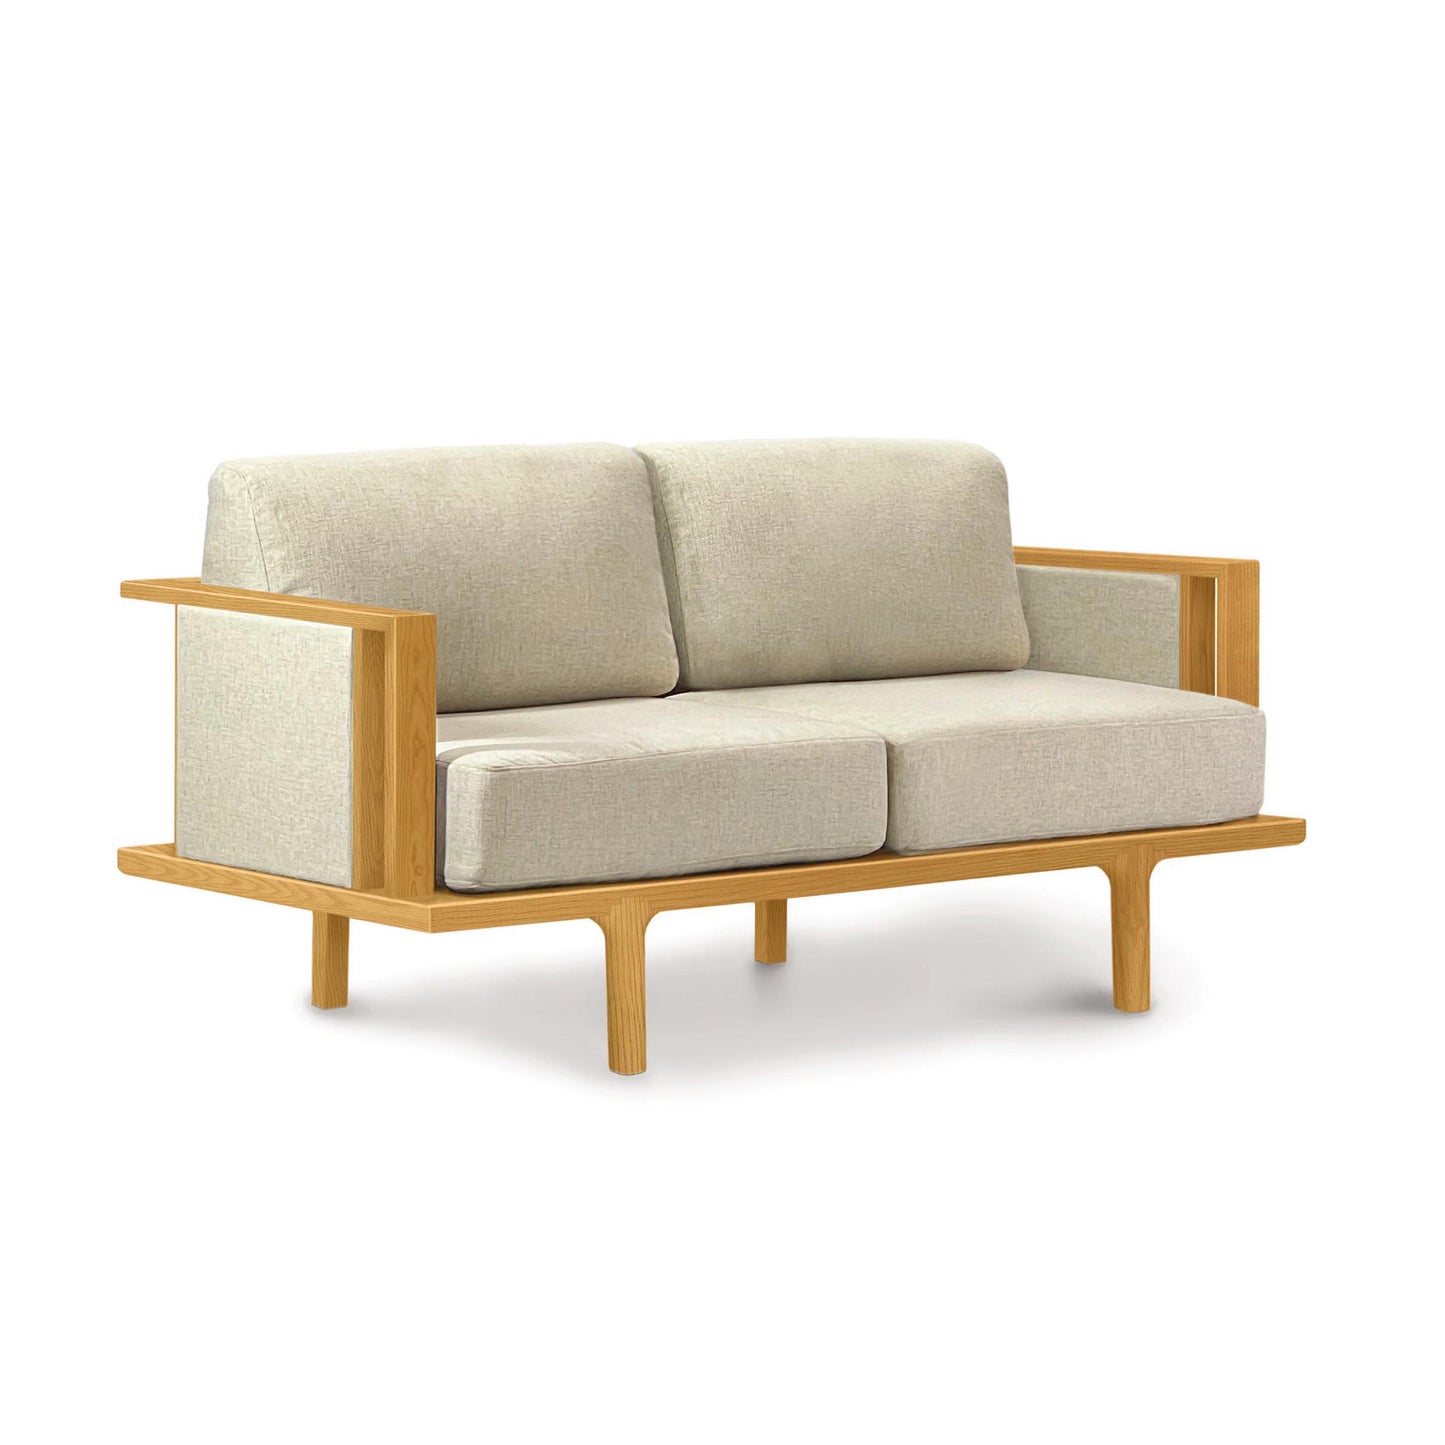 A contemporary design Copeland Furniture Sierra Cherry Upholstered Loveseat with Upholstered Panels with a wooden frame on a white background.